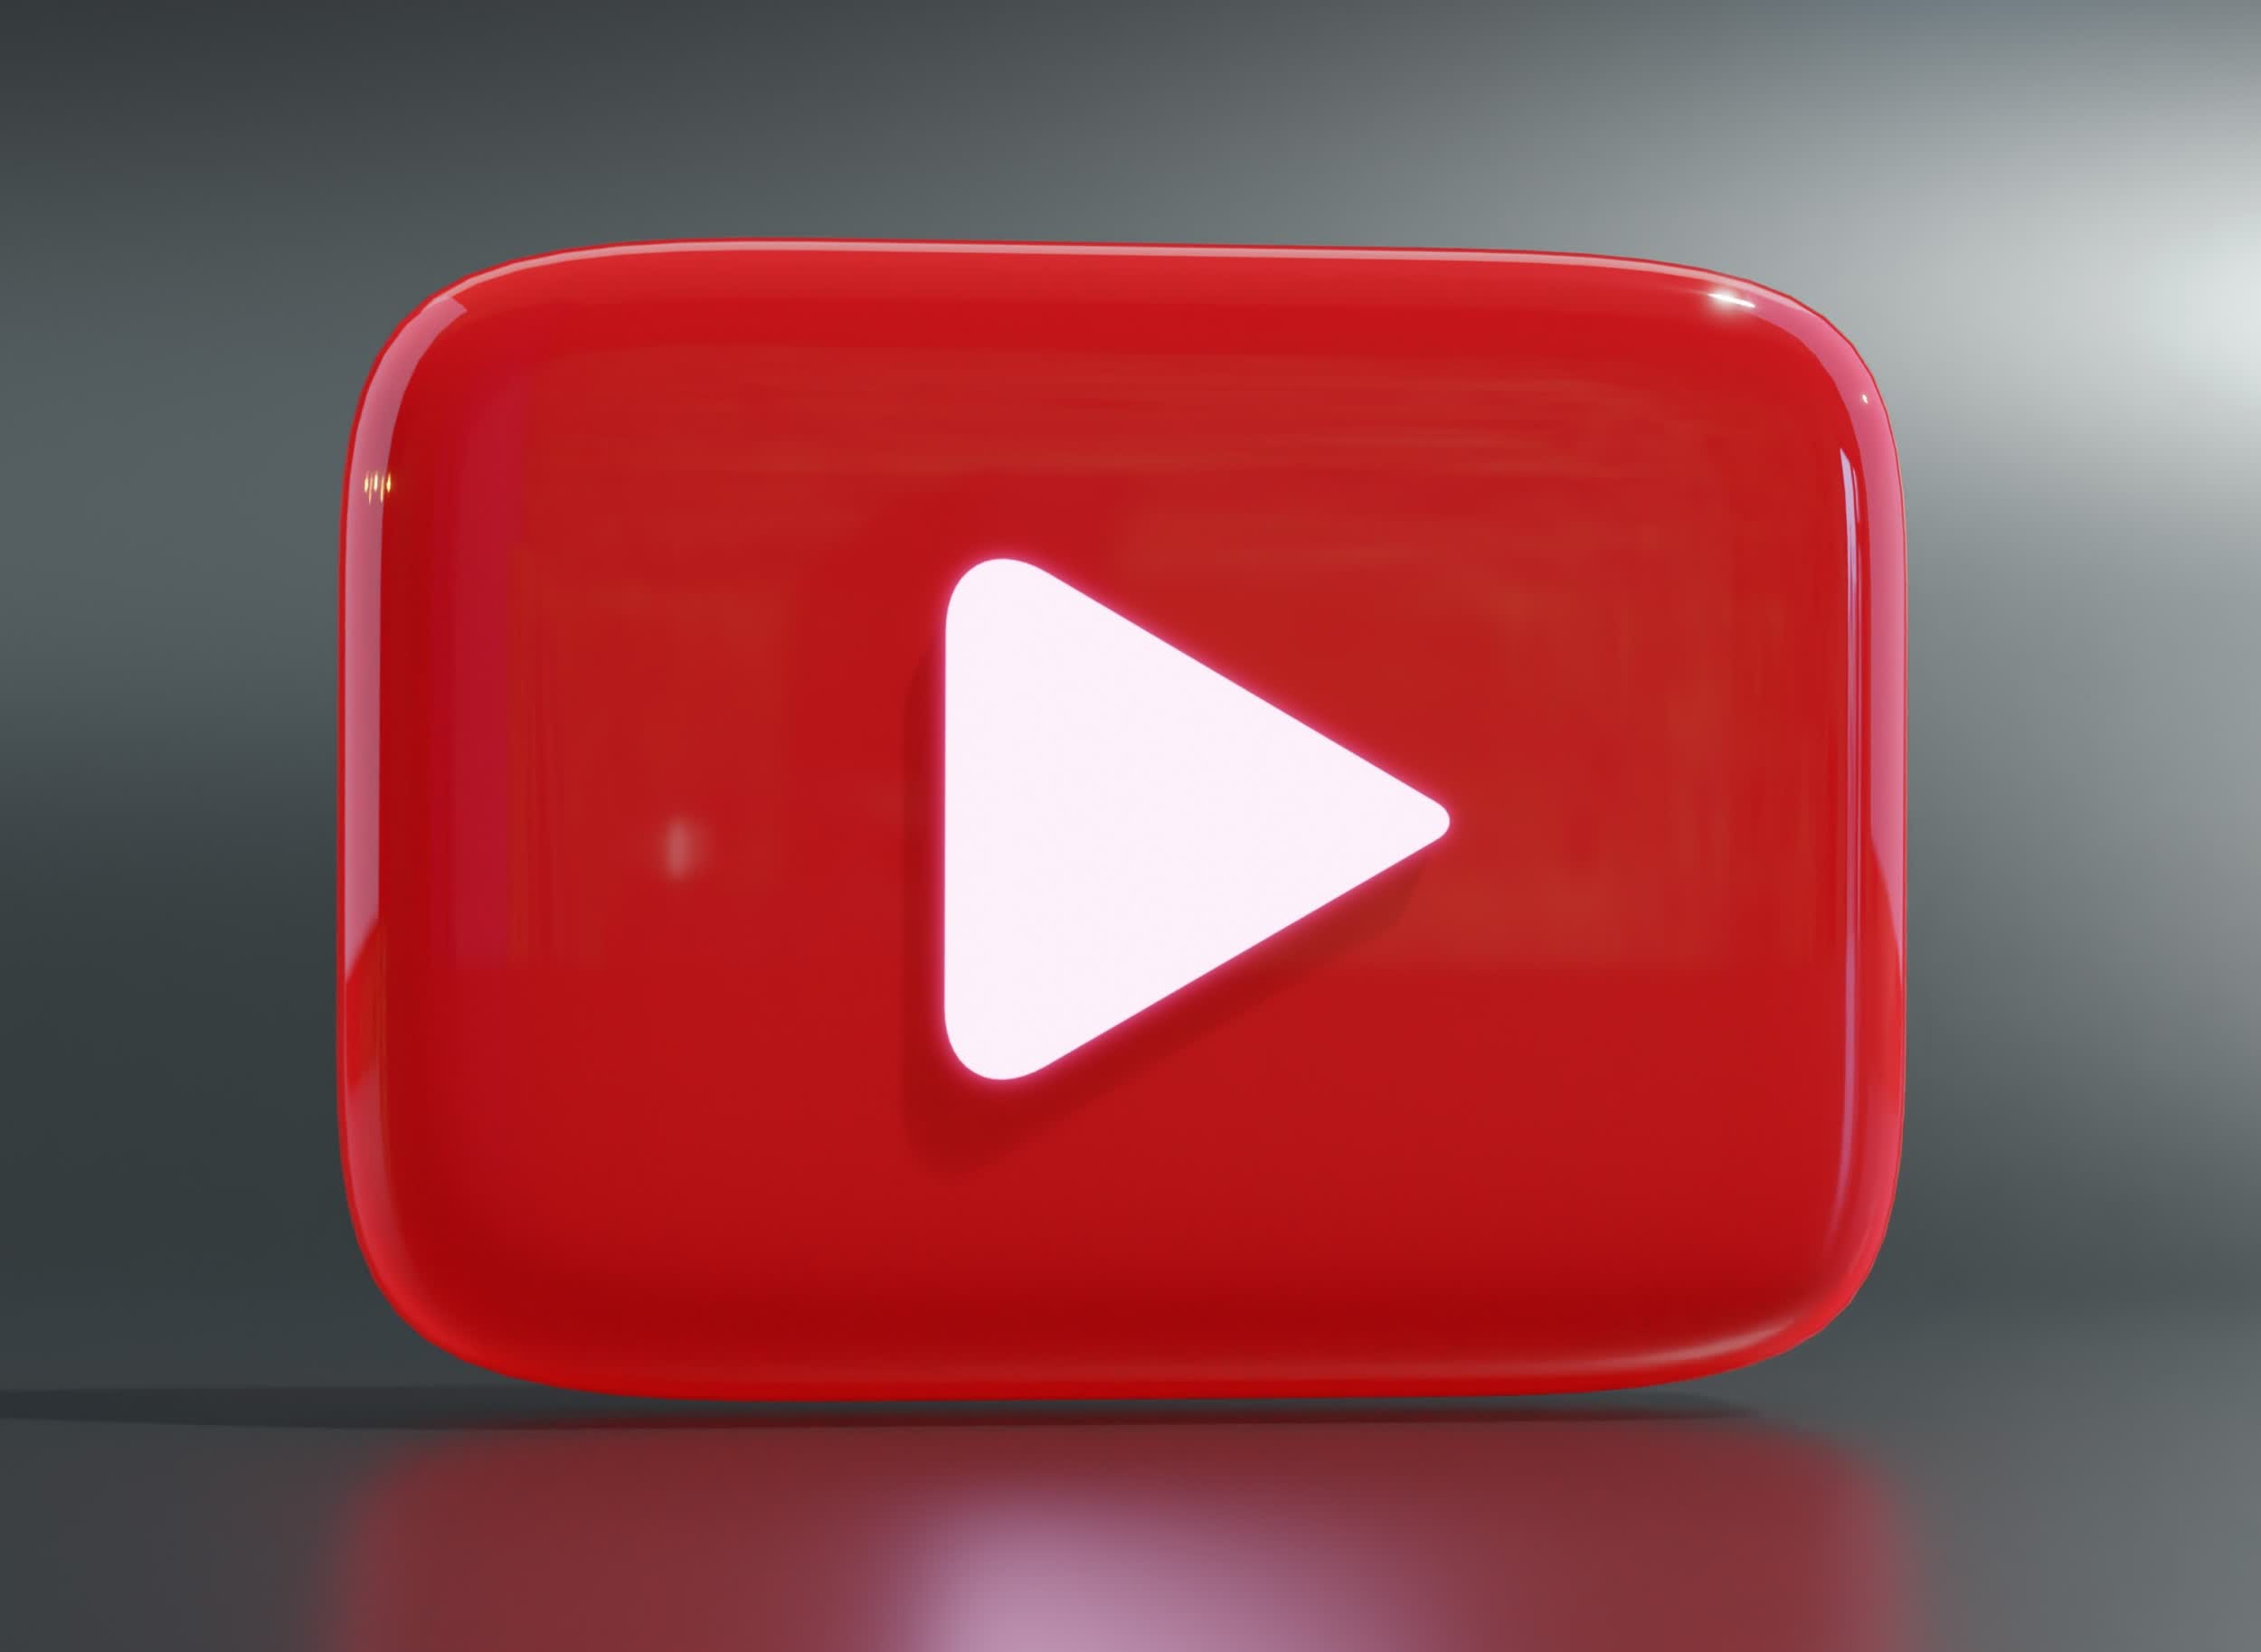 YouTube ends trial that restricted 4K content to its Premium subscription service